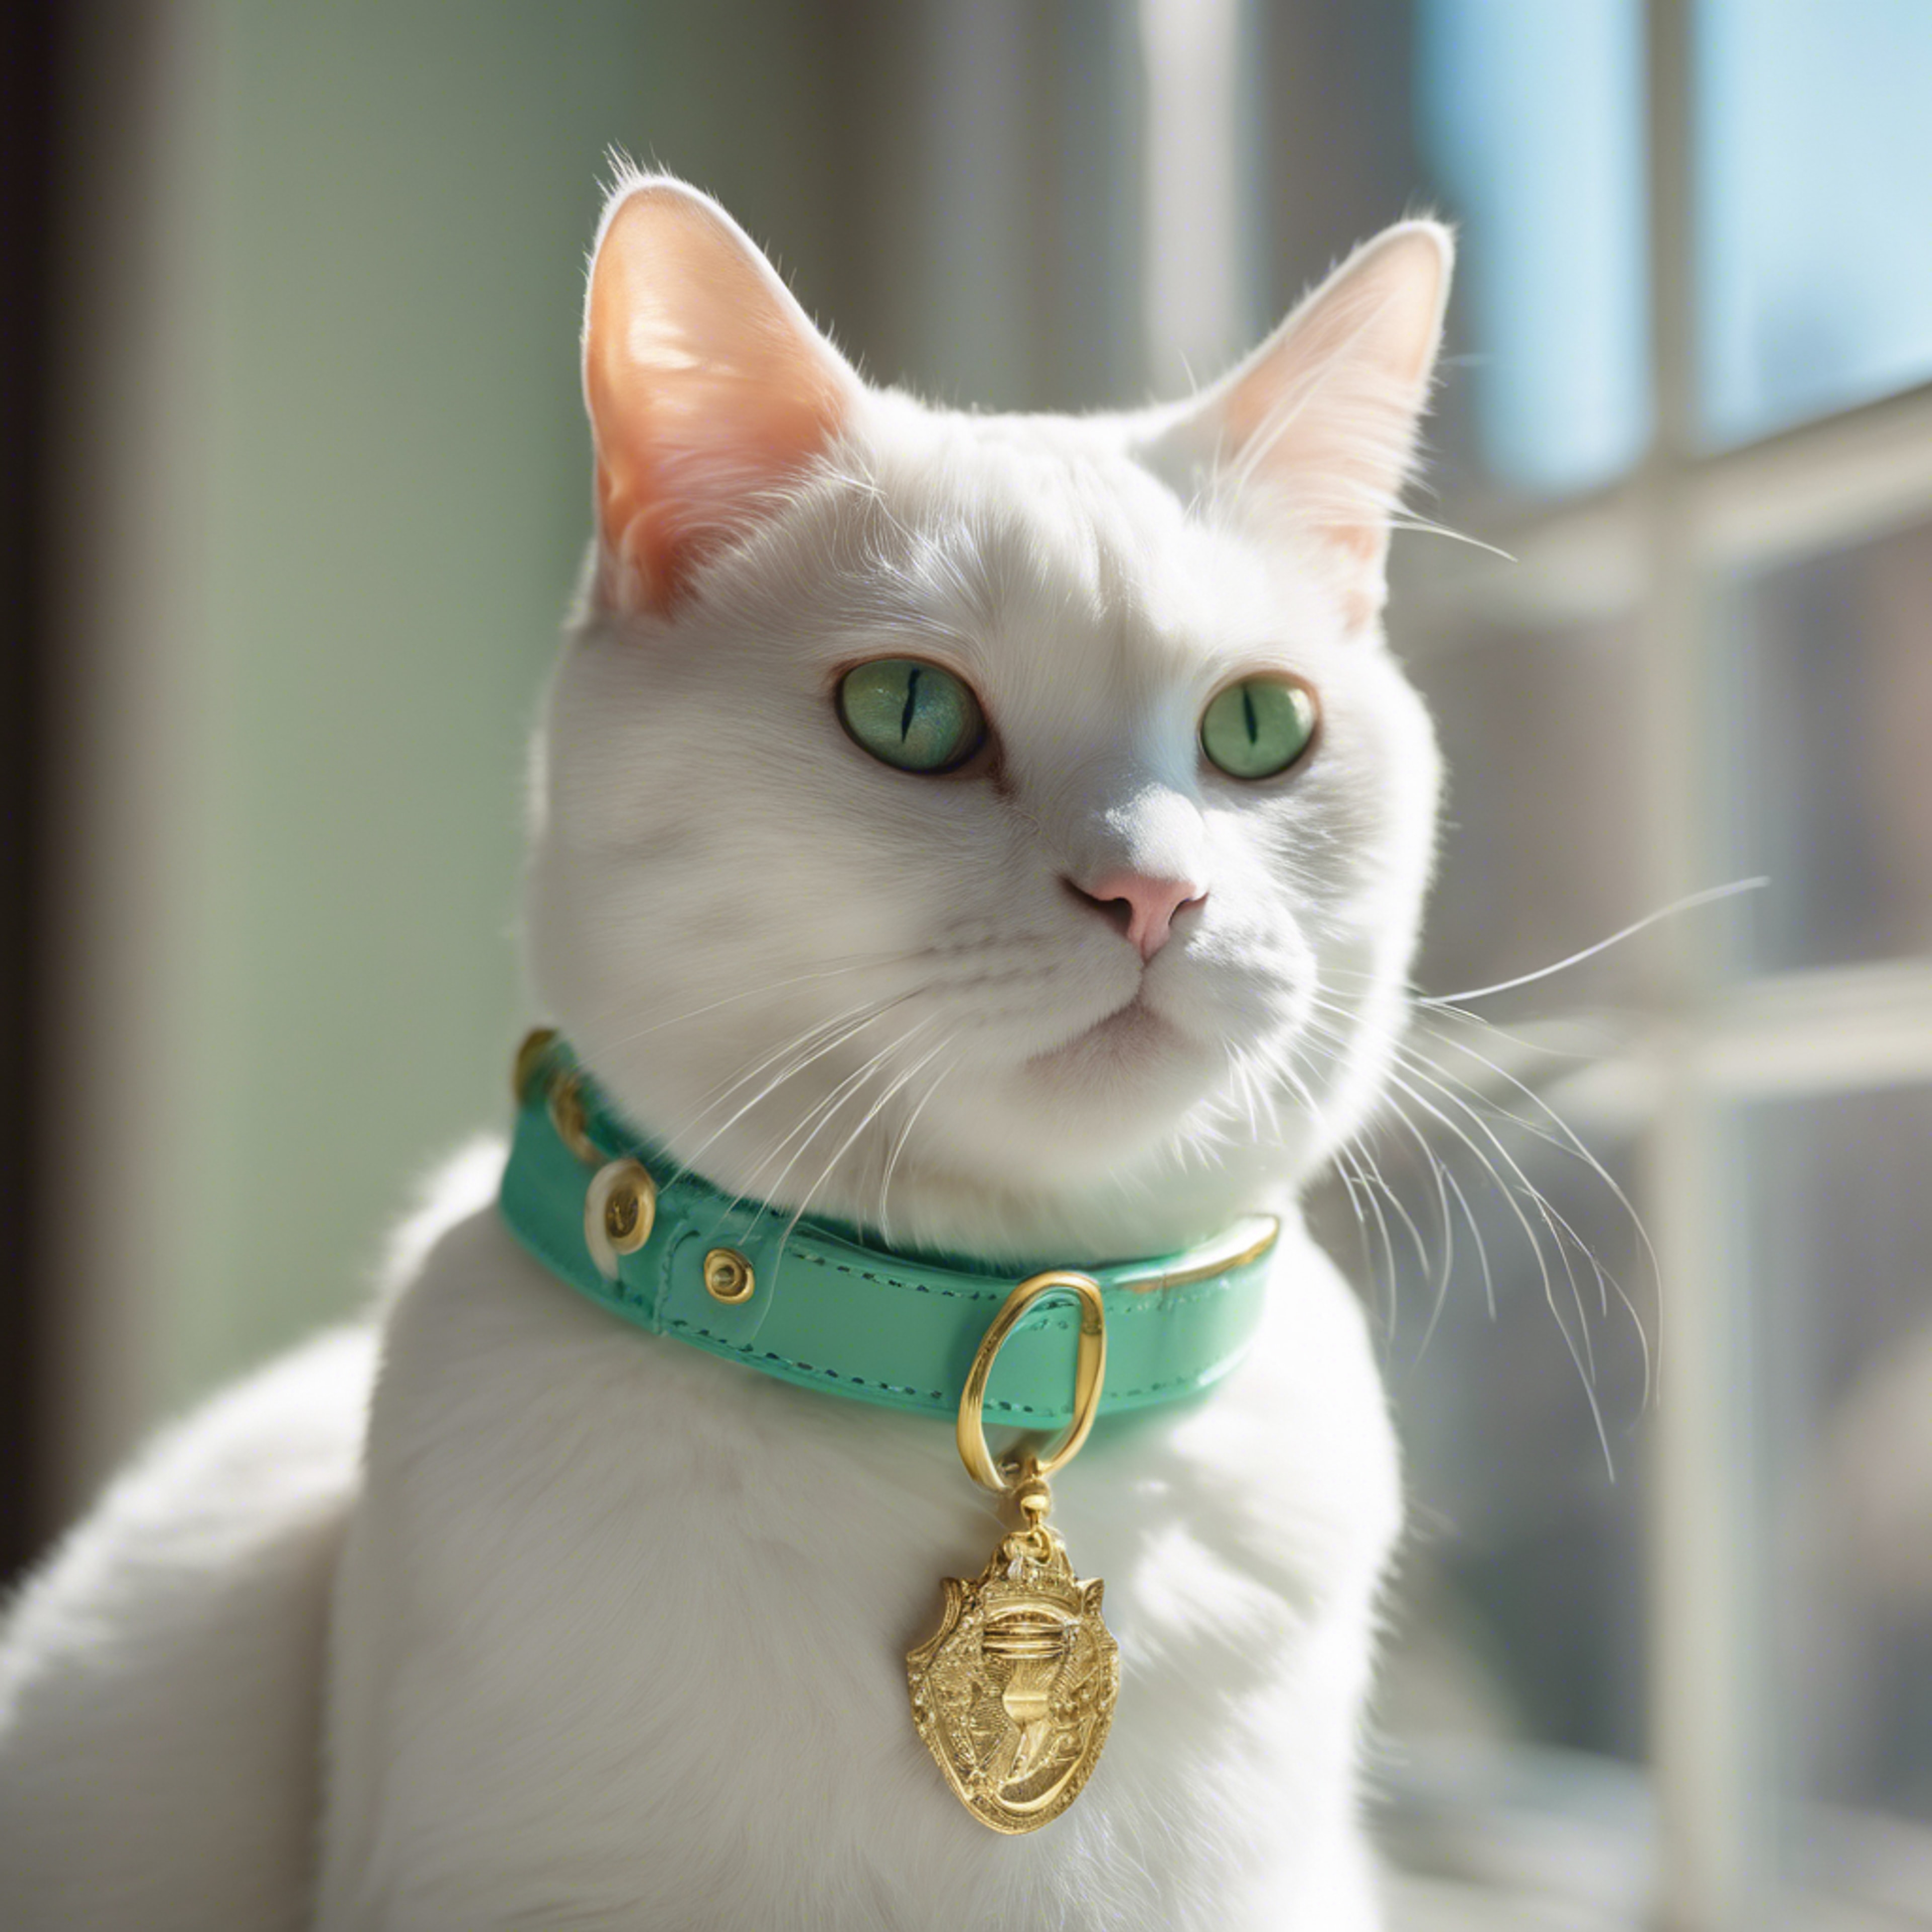 An adorable white cat wearing a preppy mint green collar with a gold buckle sitting in a sunny window. Tapet[8de0351476e04873aa5e]